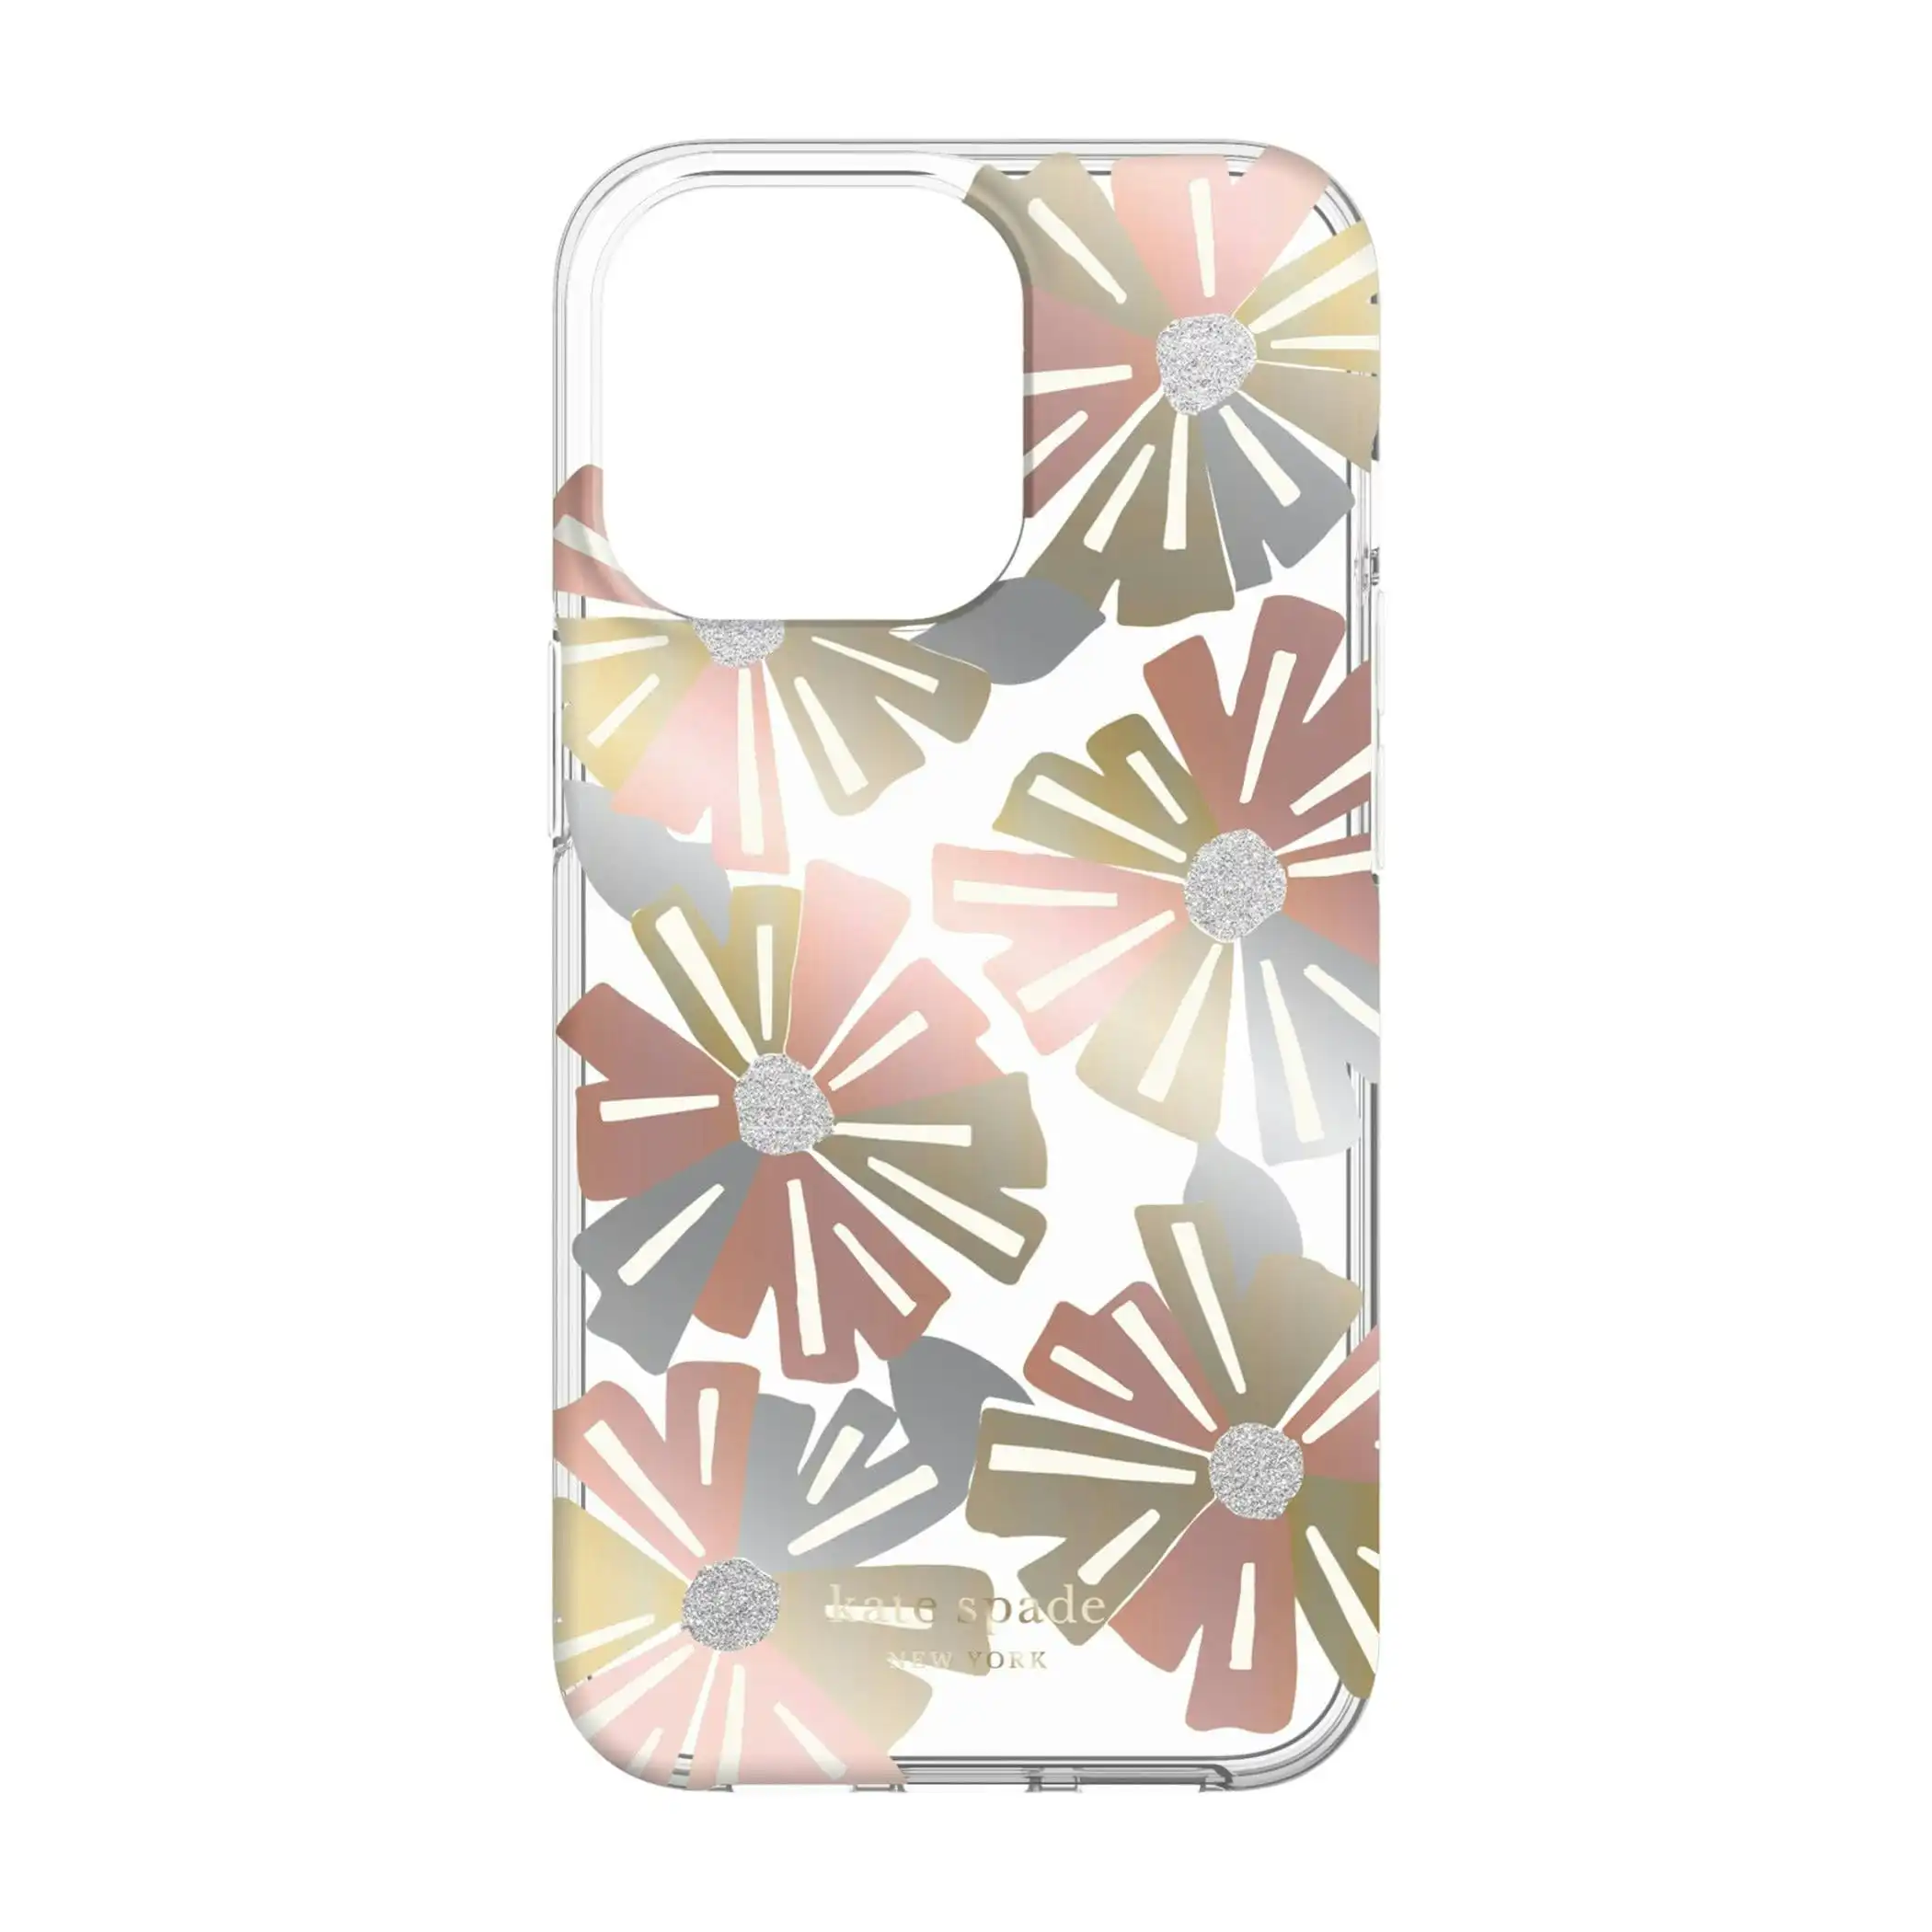 Kate Spade New York Protective Hardshell Case for iPhone 13 Pro